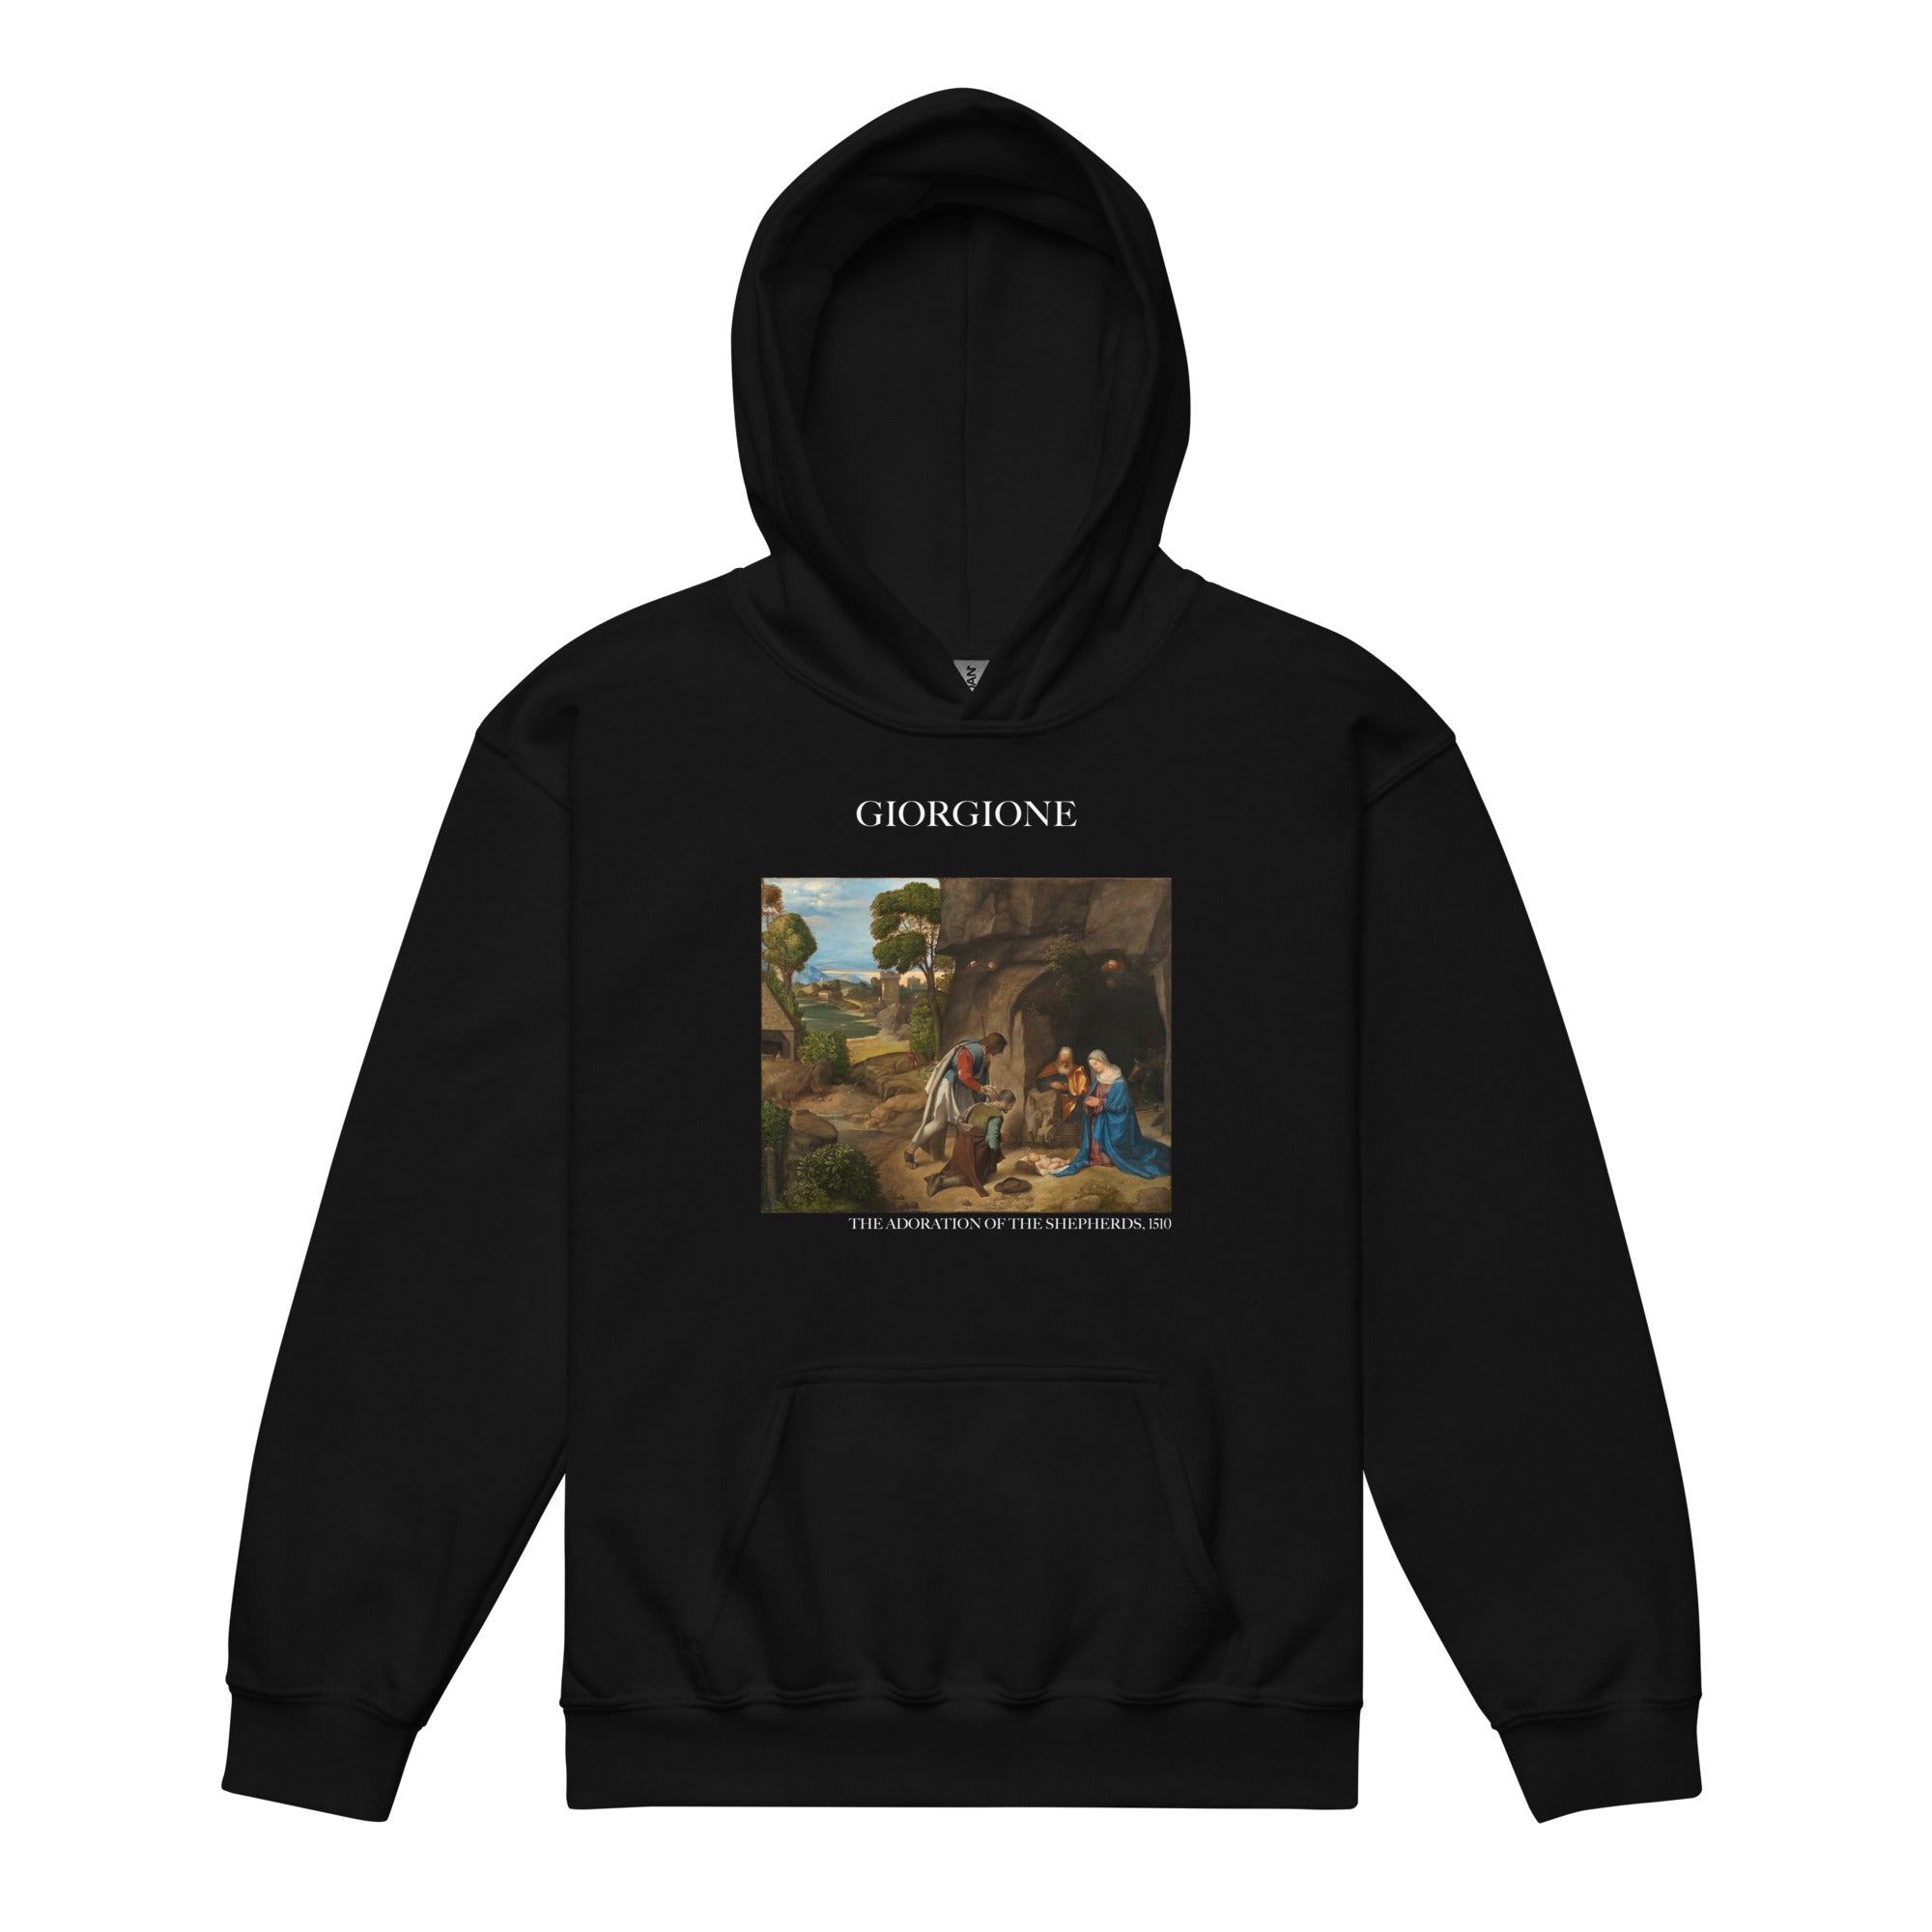 Giorgione 'The Adoration of the Shepherds' Famous Painting Hoodie | Premium Youth Art Hoodie